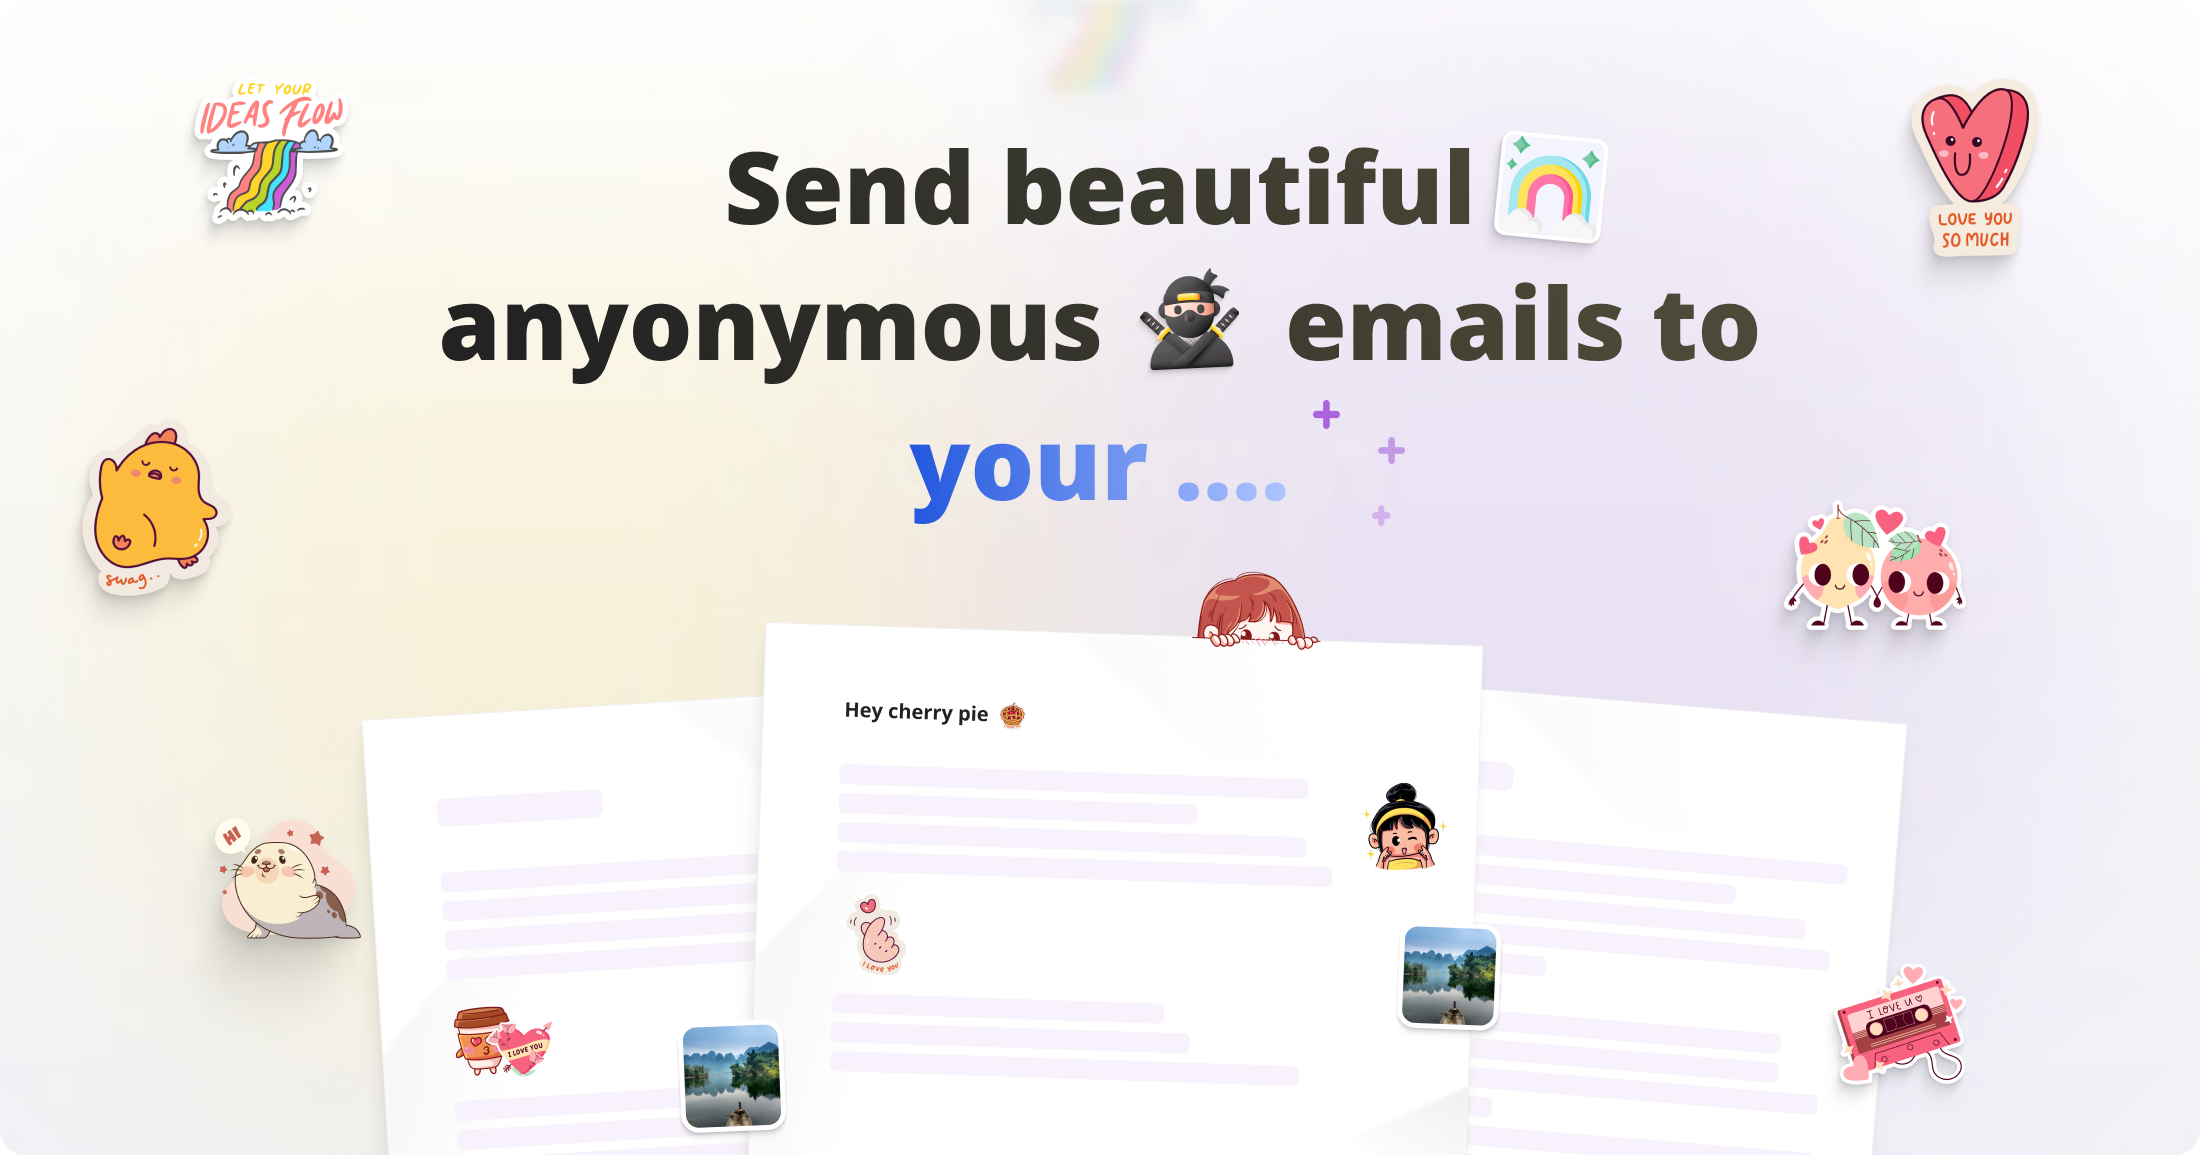 letters-5 - Send beautiful emails, anonymously